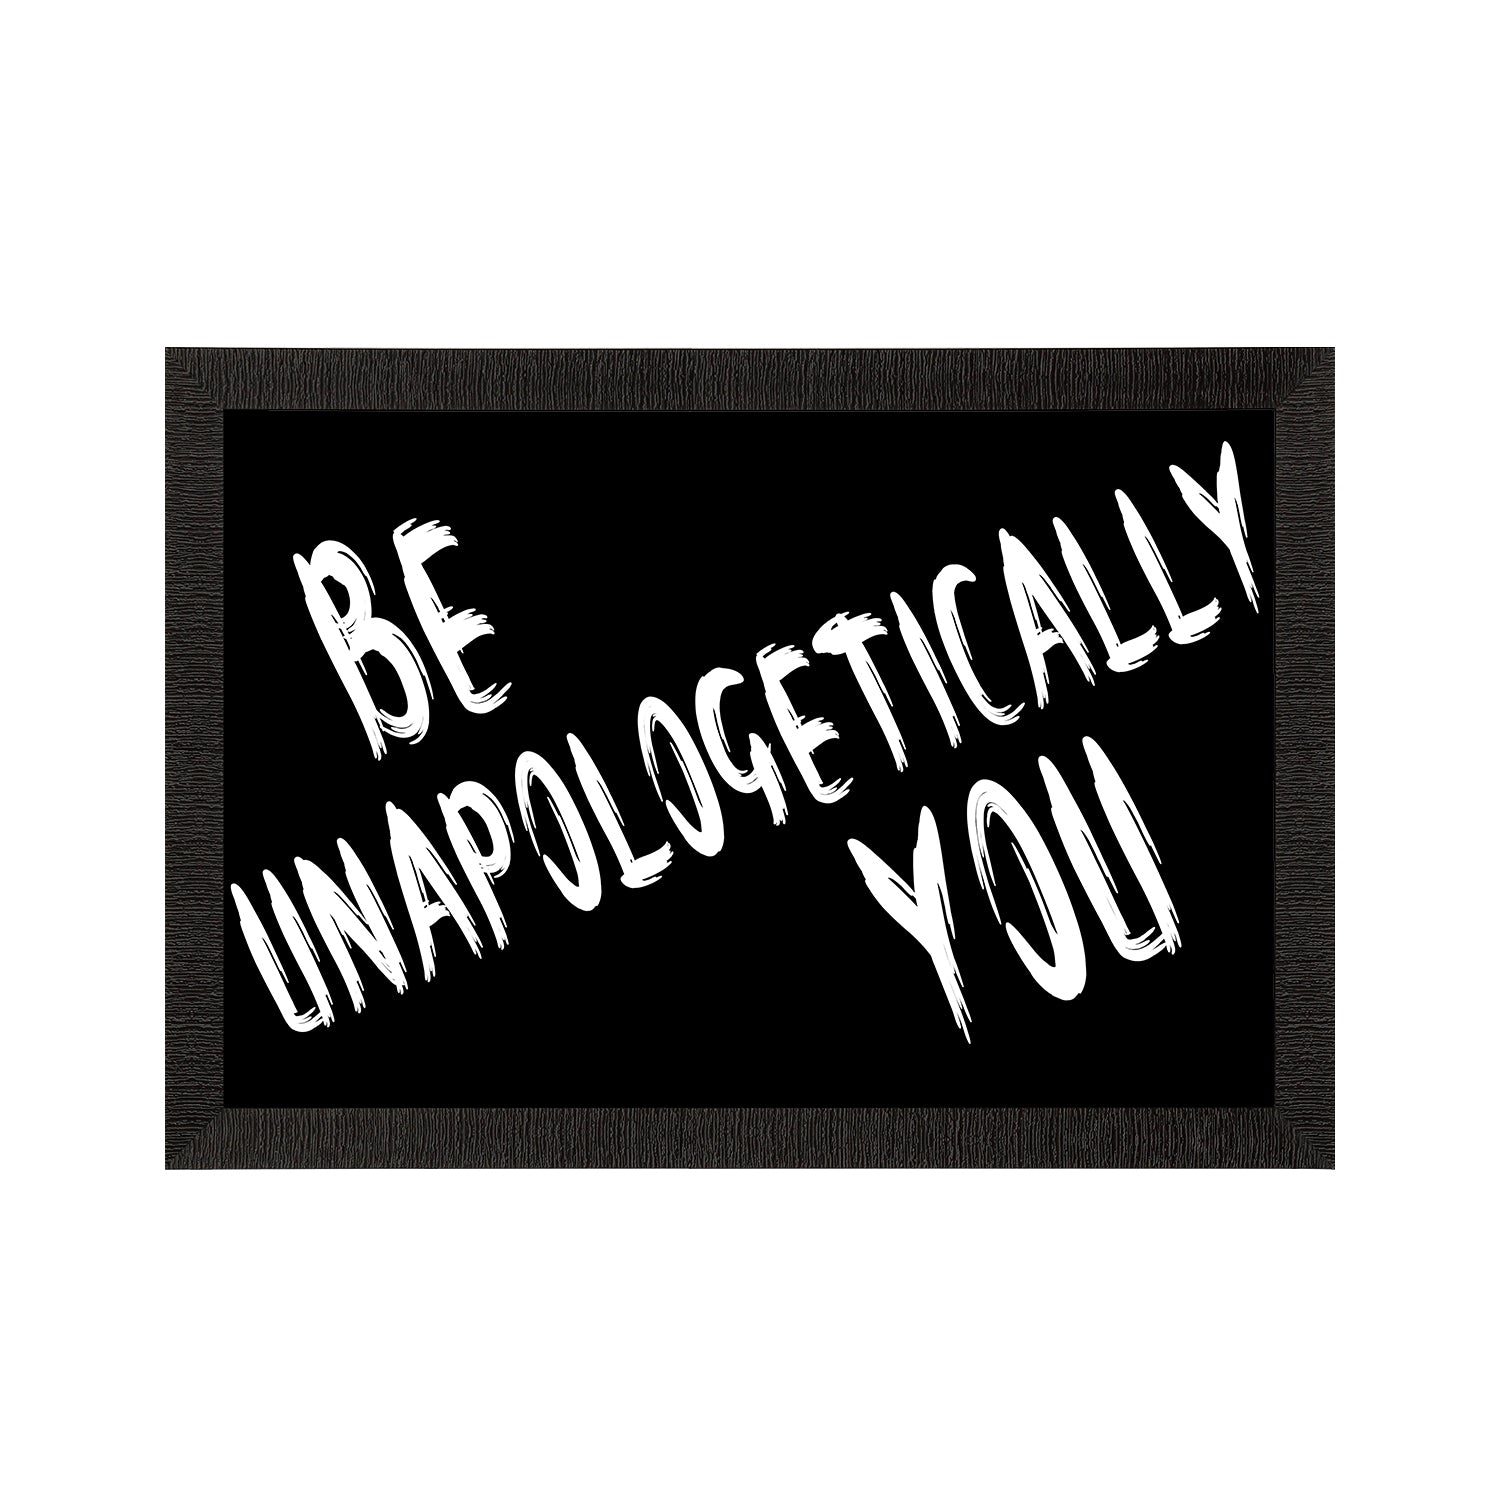 "Be Unapologetically you" Motivational Quote Satin Matt Texture UV Art Painting